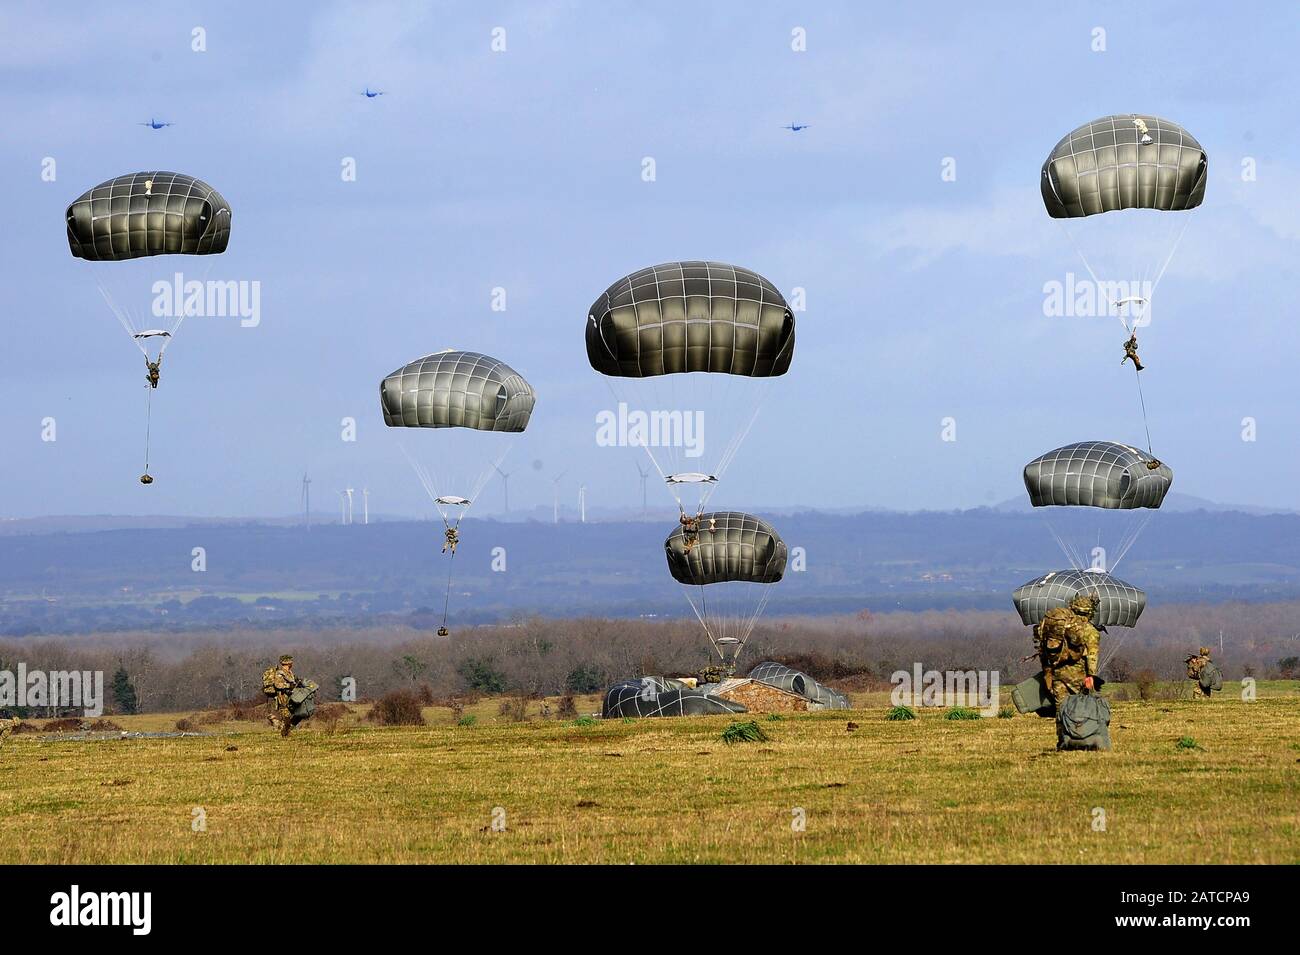 U.S. paratroopers from HHC, 2nd Battalion, 503rd  Infantry Regiment, 173rd Airborne Brigade and Italian paratroopers from Reggimento Savoia Cavalleria 3, conduct a combined airborne operation during Exercise Rock Topside 20, Monte Romano, Italy, Jan. 29, 2020. Rock Topside is a joint forced entry exercise to train the battalion’s ability to conduct airborne contingency response force operations. This training stresses the interoperability of both the paratroopers of the 2nd Battalion, 503rd Infantry Regiment and Italian paratroopers of Reggimento Savoia Cavalleria 3. (U.S Army photo by Elena B Stock Photo